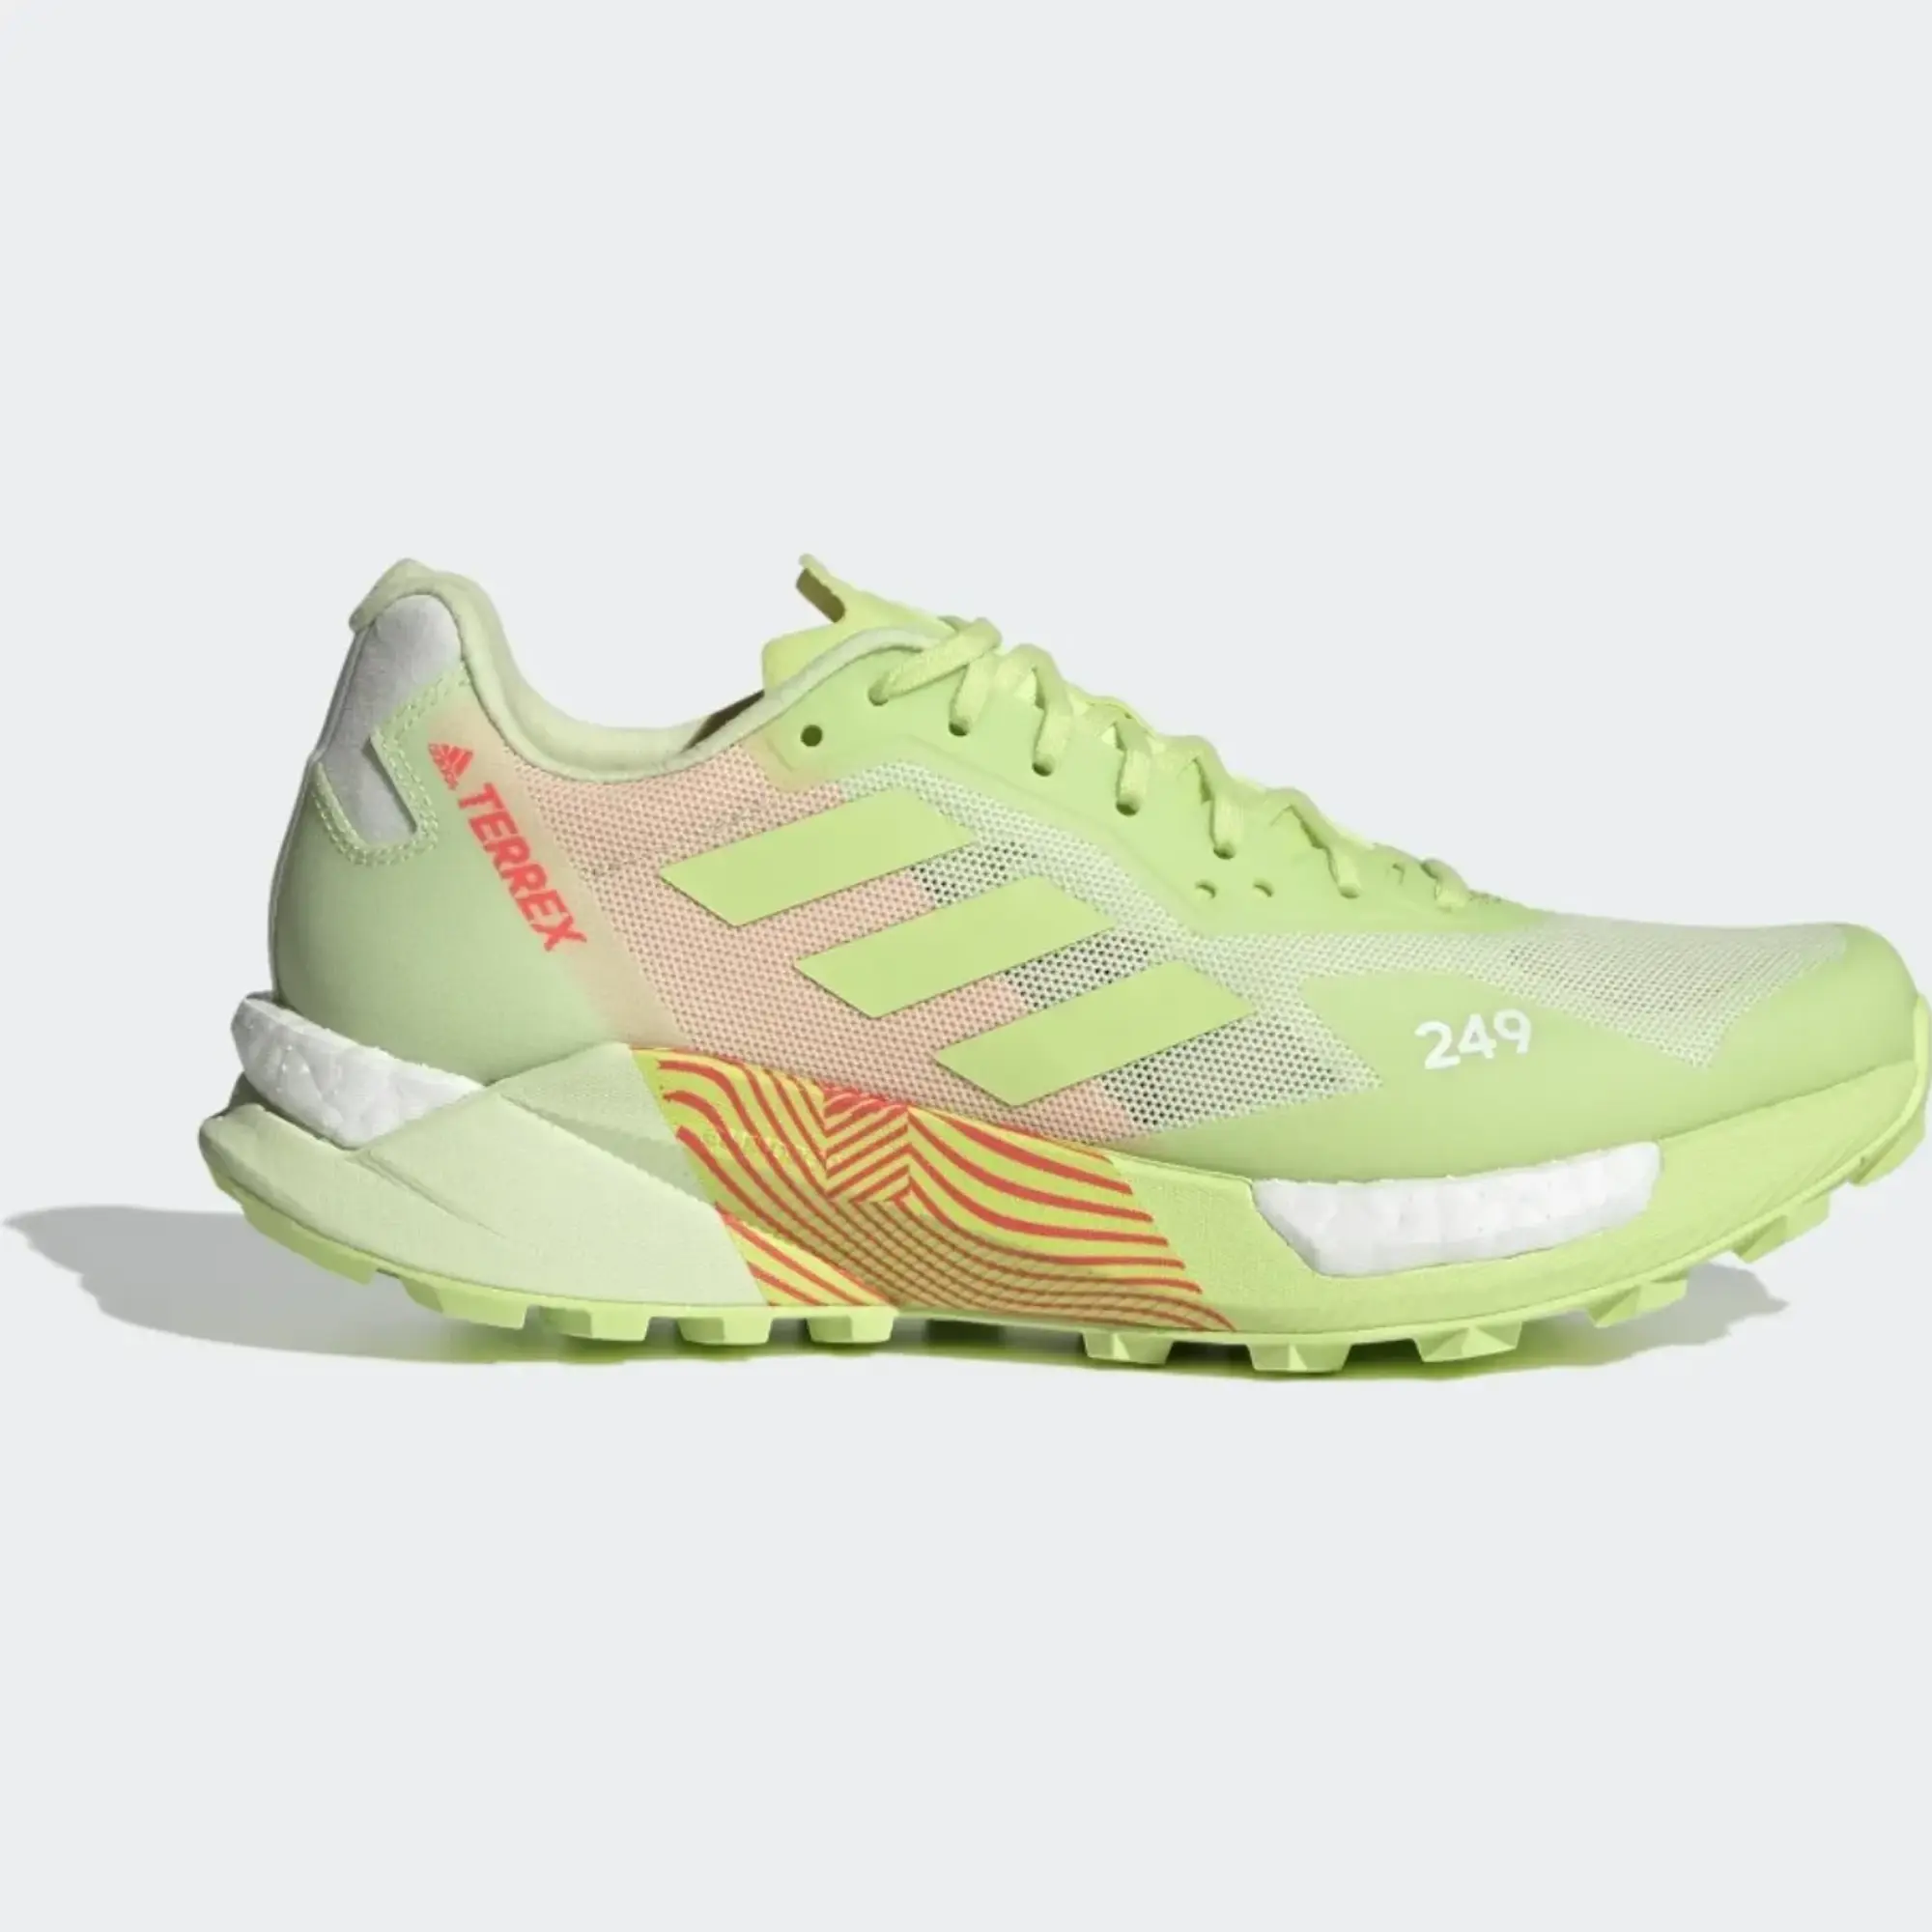 adidas Terrex Agravic Ultra Trail Running Shoes